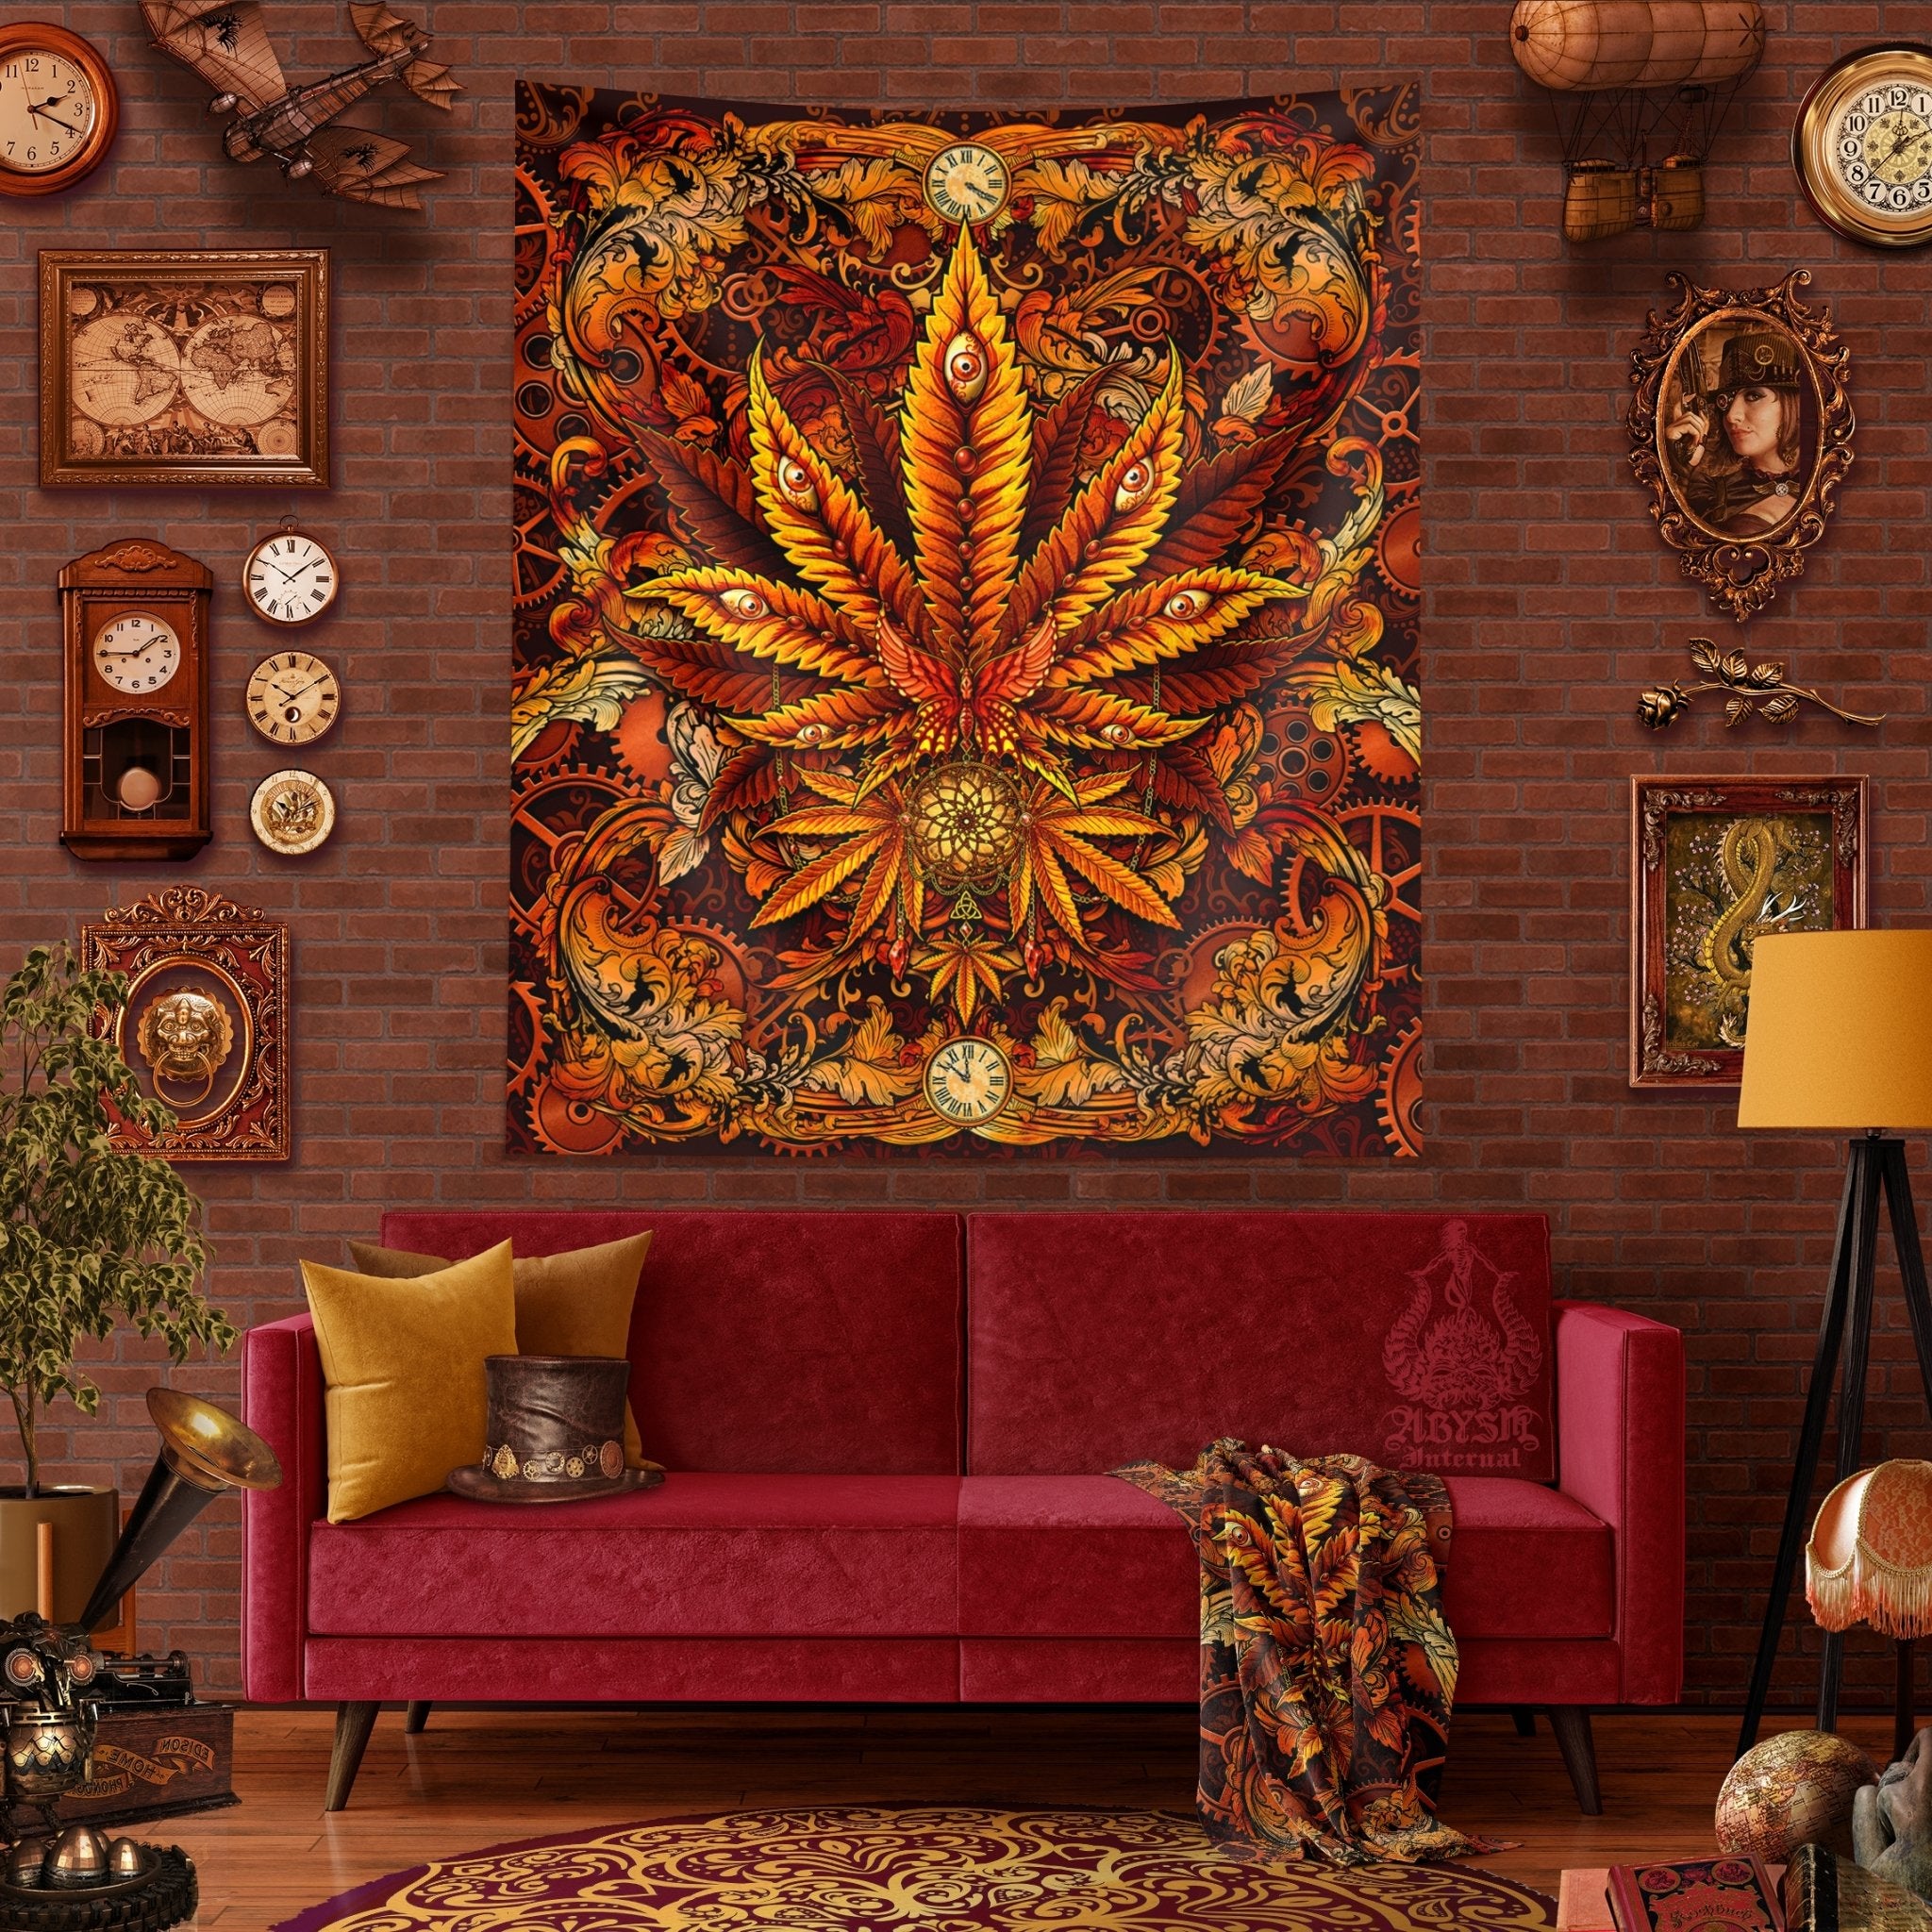 Weed Tapestry, Cannabis Shop Decor, Marijuana Wall Hanging, Indie Home Decor, Eclectic Art Print, 420 Gift - Steampunk - Abysm Internal